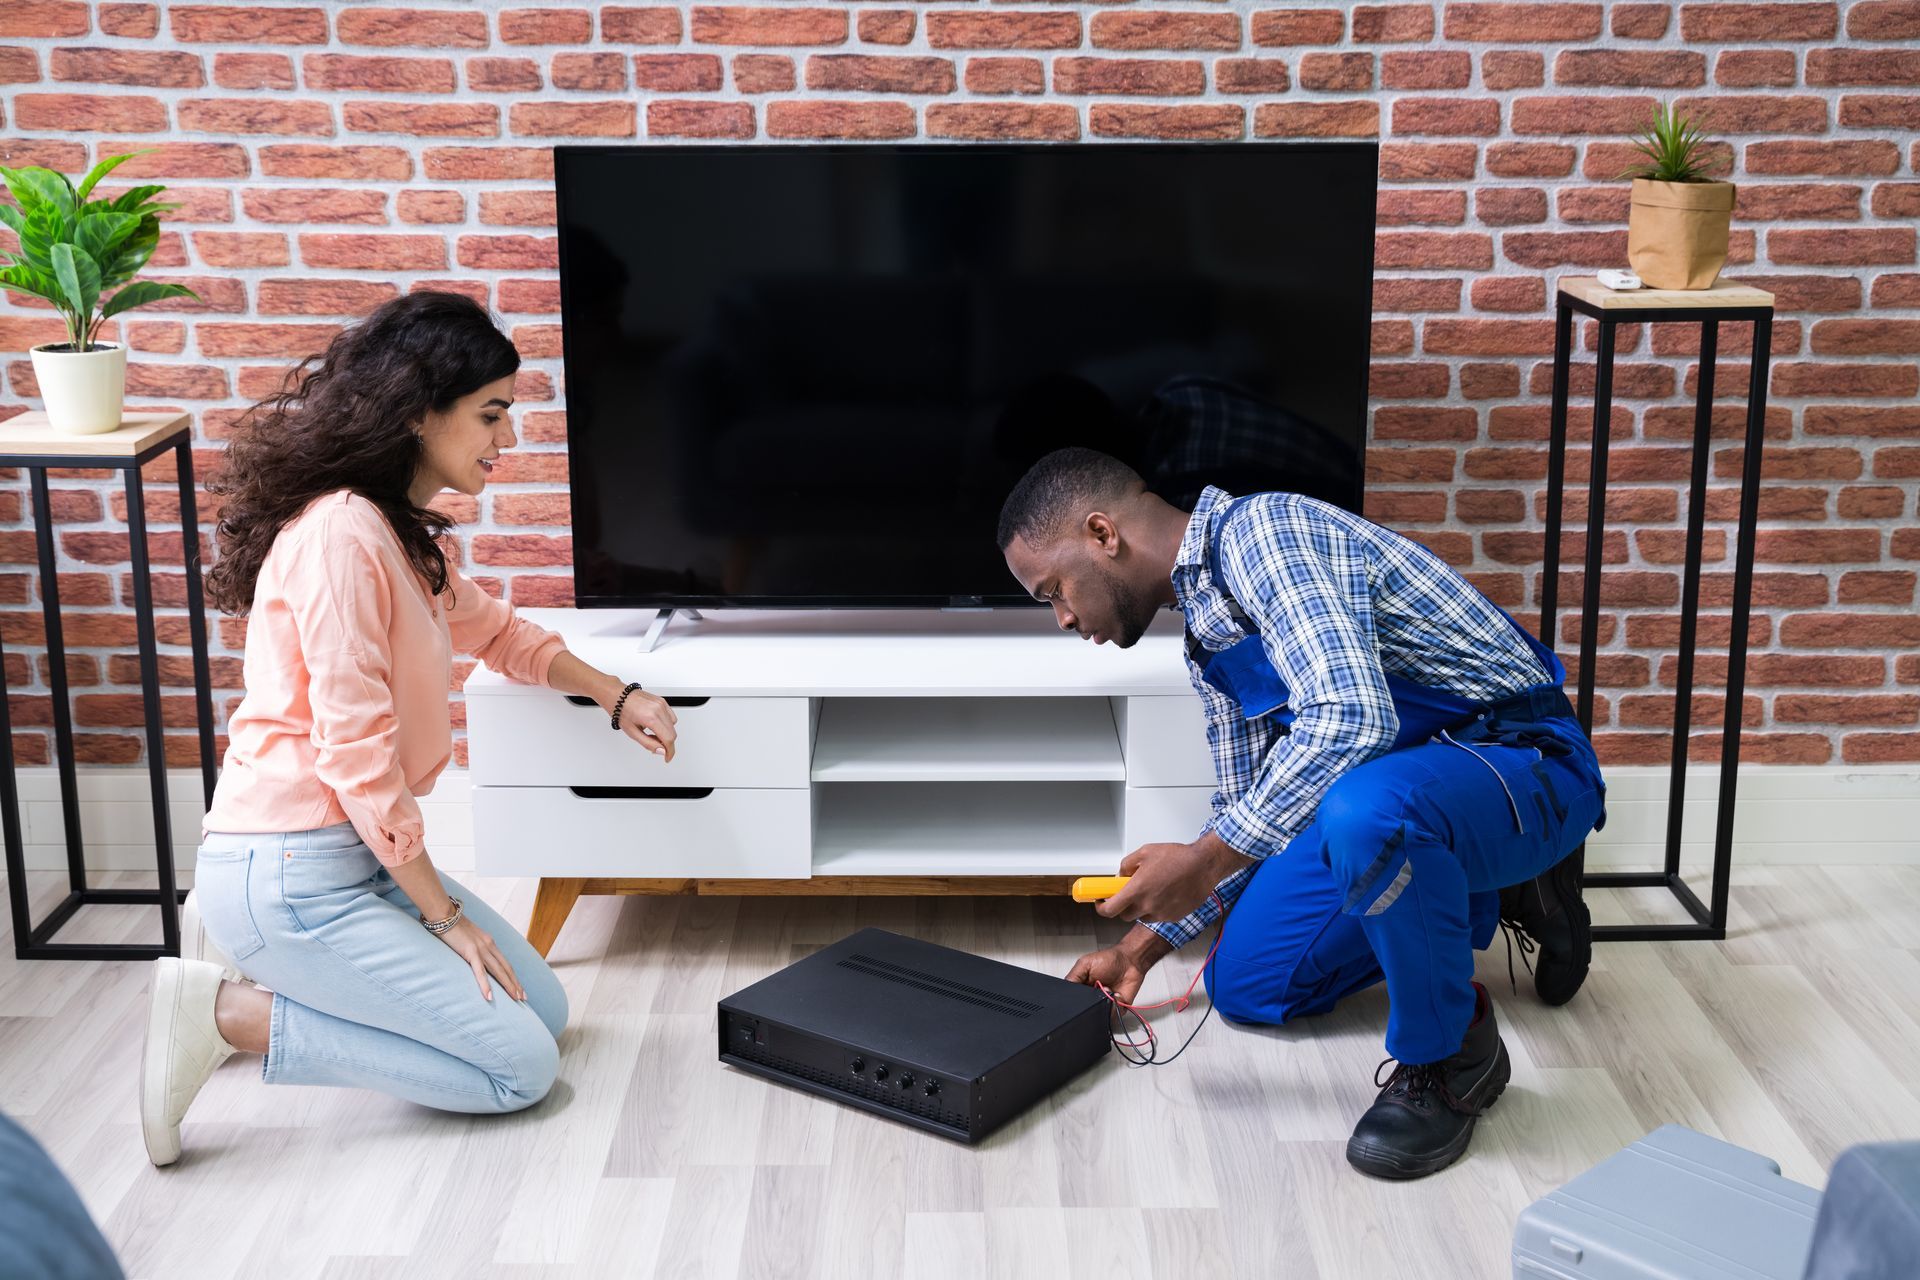 A technician installing a home theater system